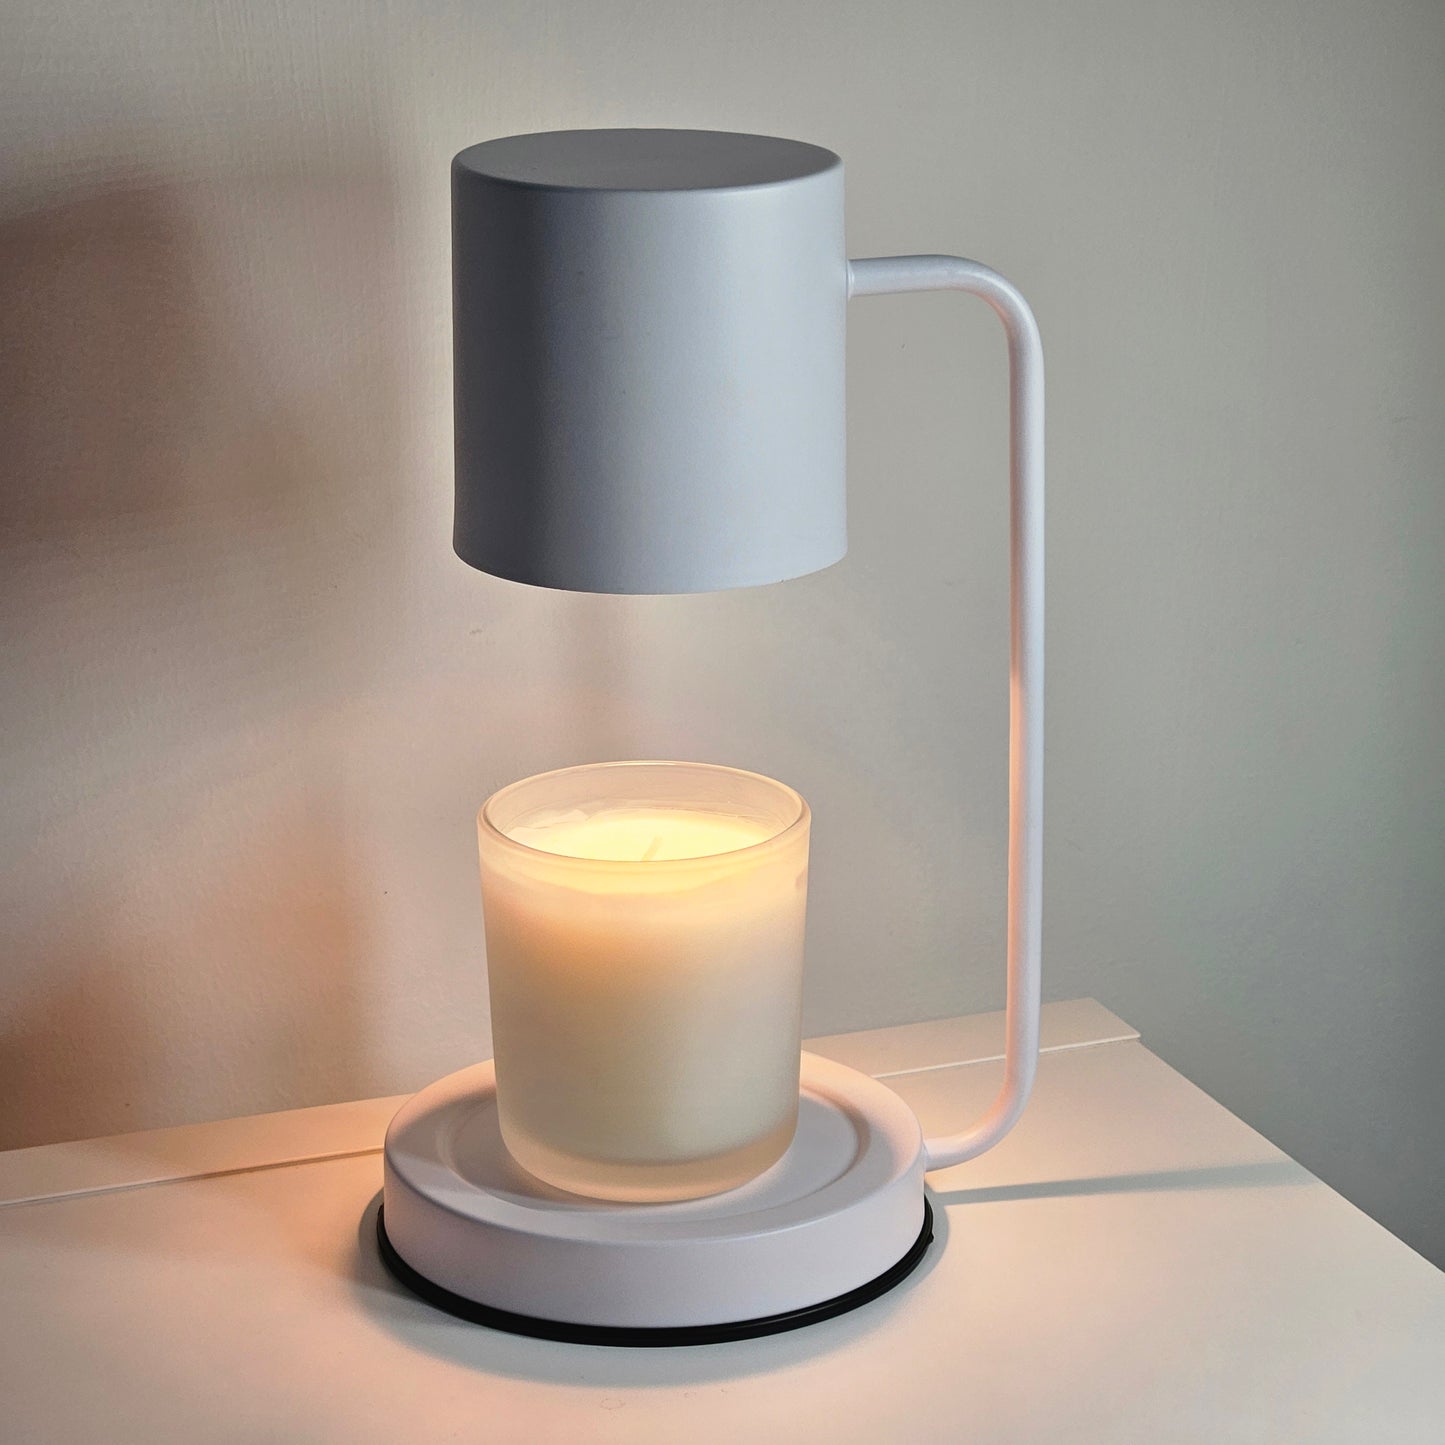 Warming Up Candles - Simple Candle Warmer Lamp